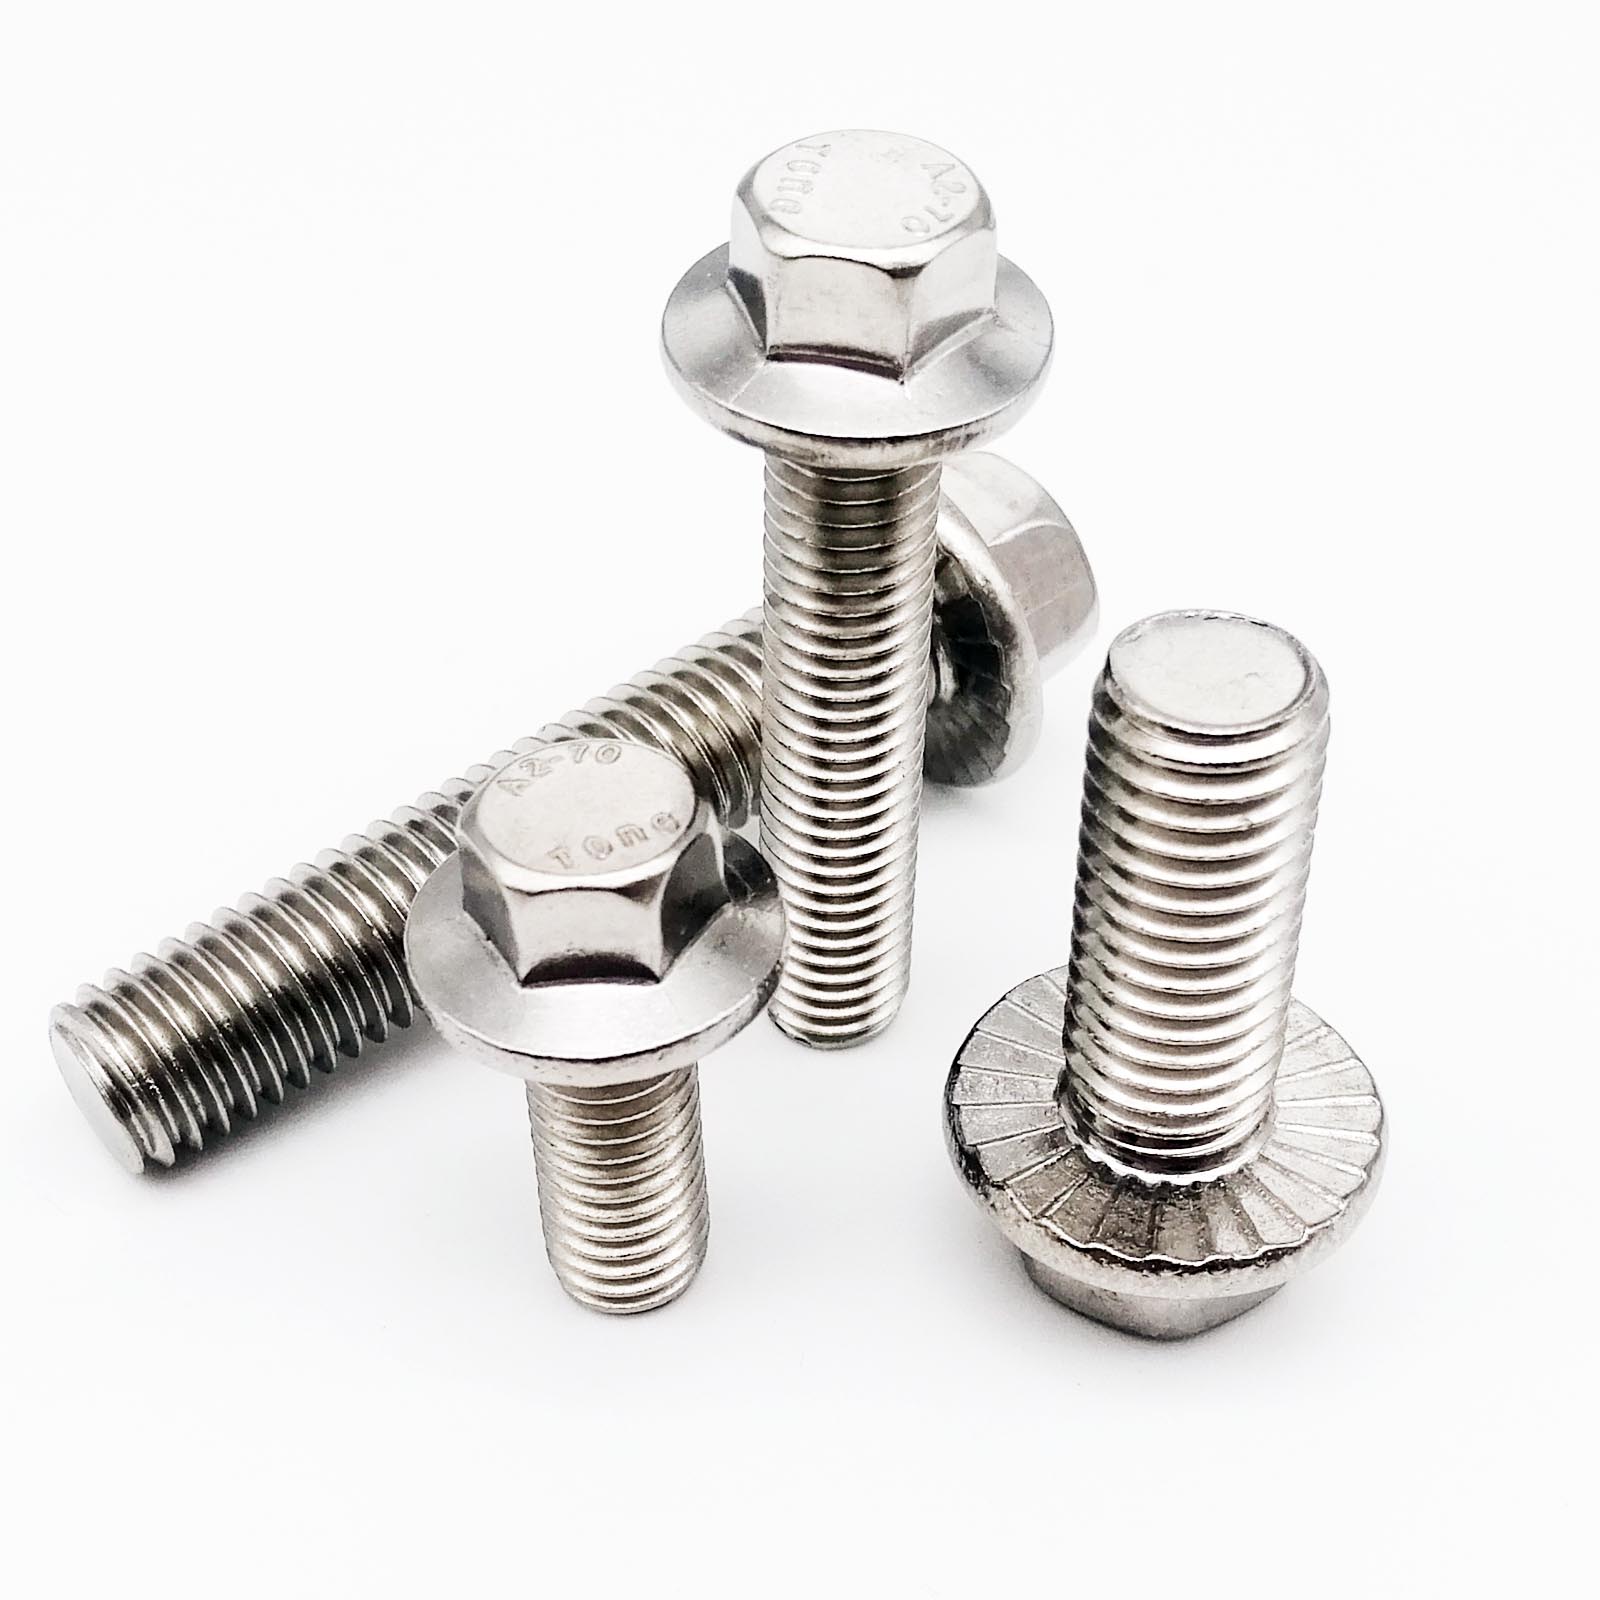 A2 304 Stainless Details about   M8 M10 M12 Fine Pitch Hex Serrated Flange Nuts Flanged Nut 